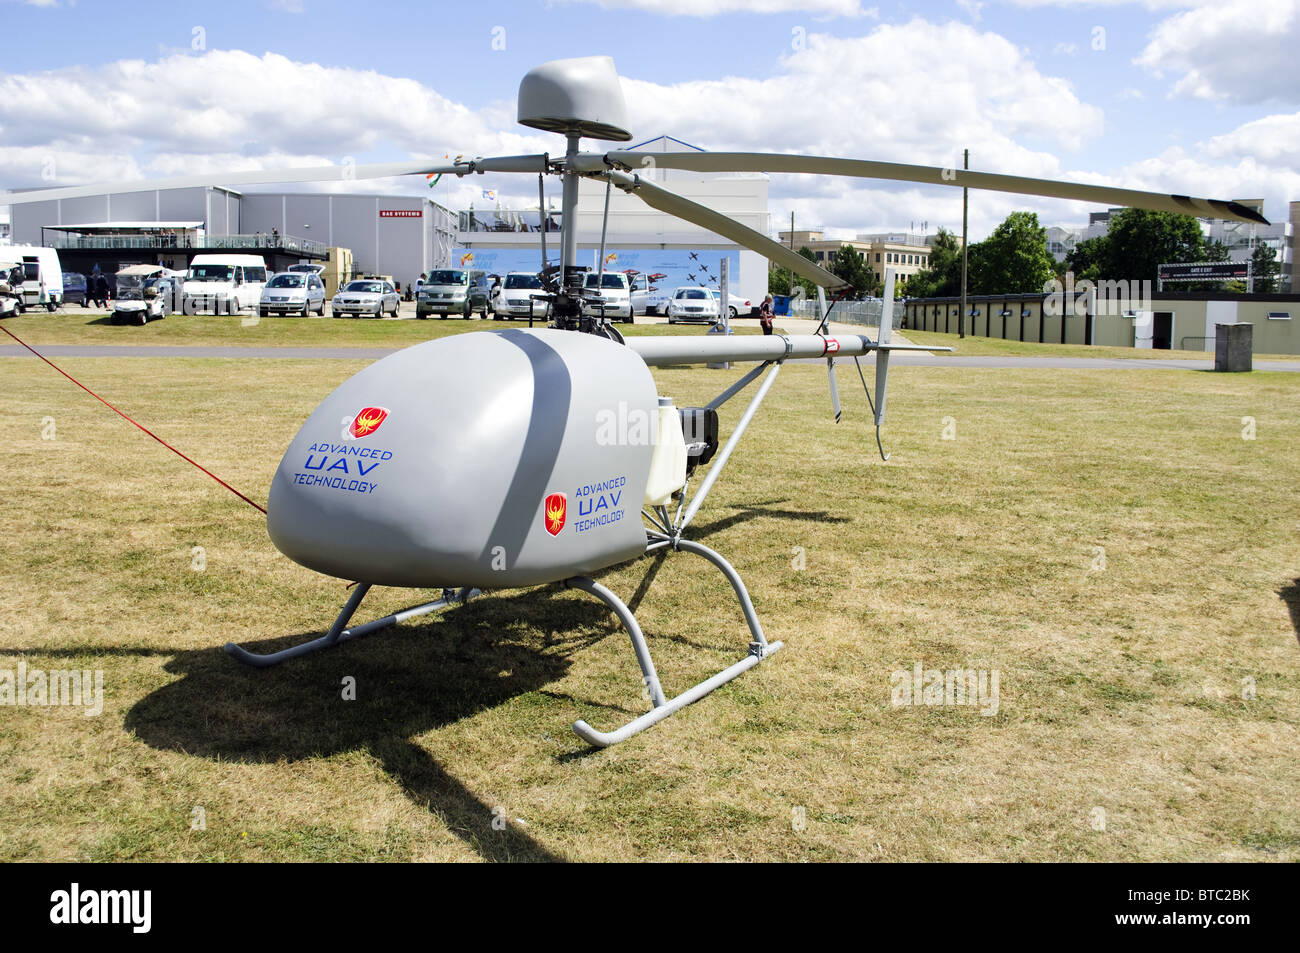 Advanced UAV Technology AT-1000 surveilance helicopter on show at Farnborough Airshow 2010 Stock Photo